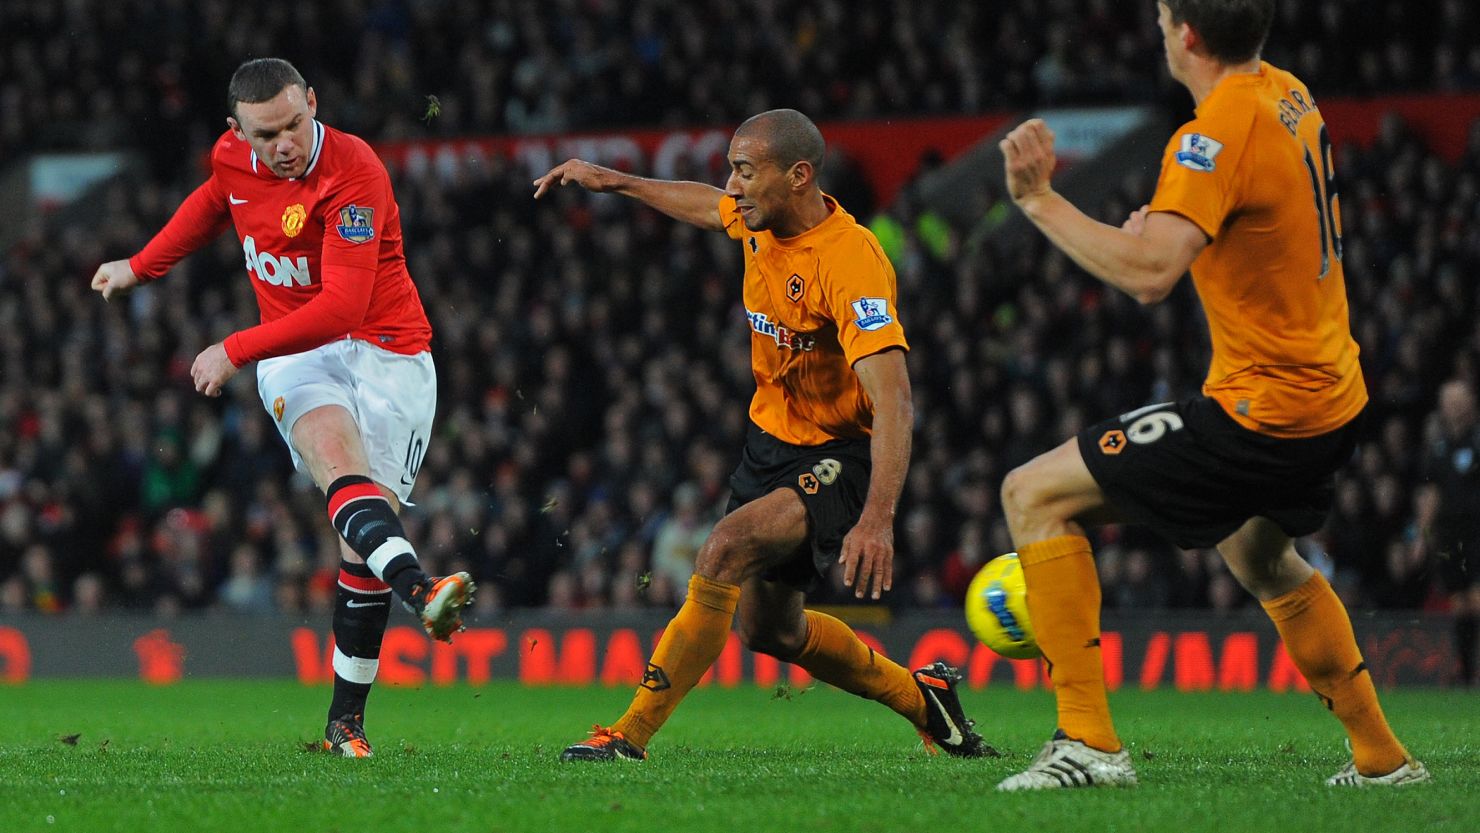 Wayne Rooney fires Manchester United's second goal against Wolverhampton Wanderers at Old Trafford on Saturday.